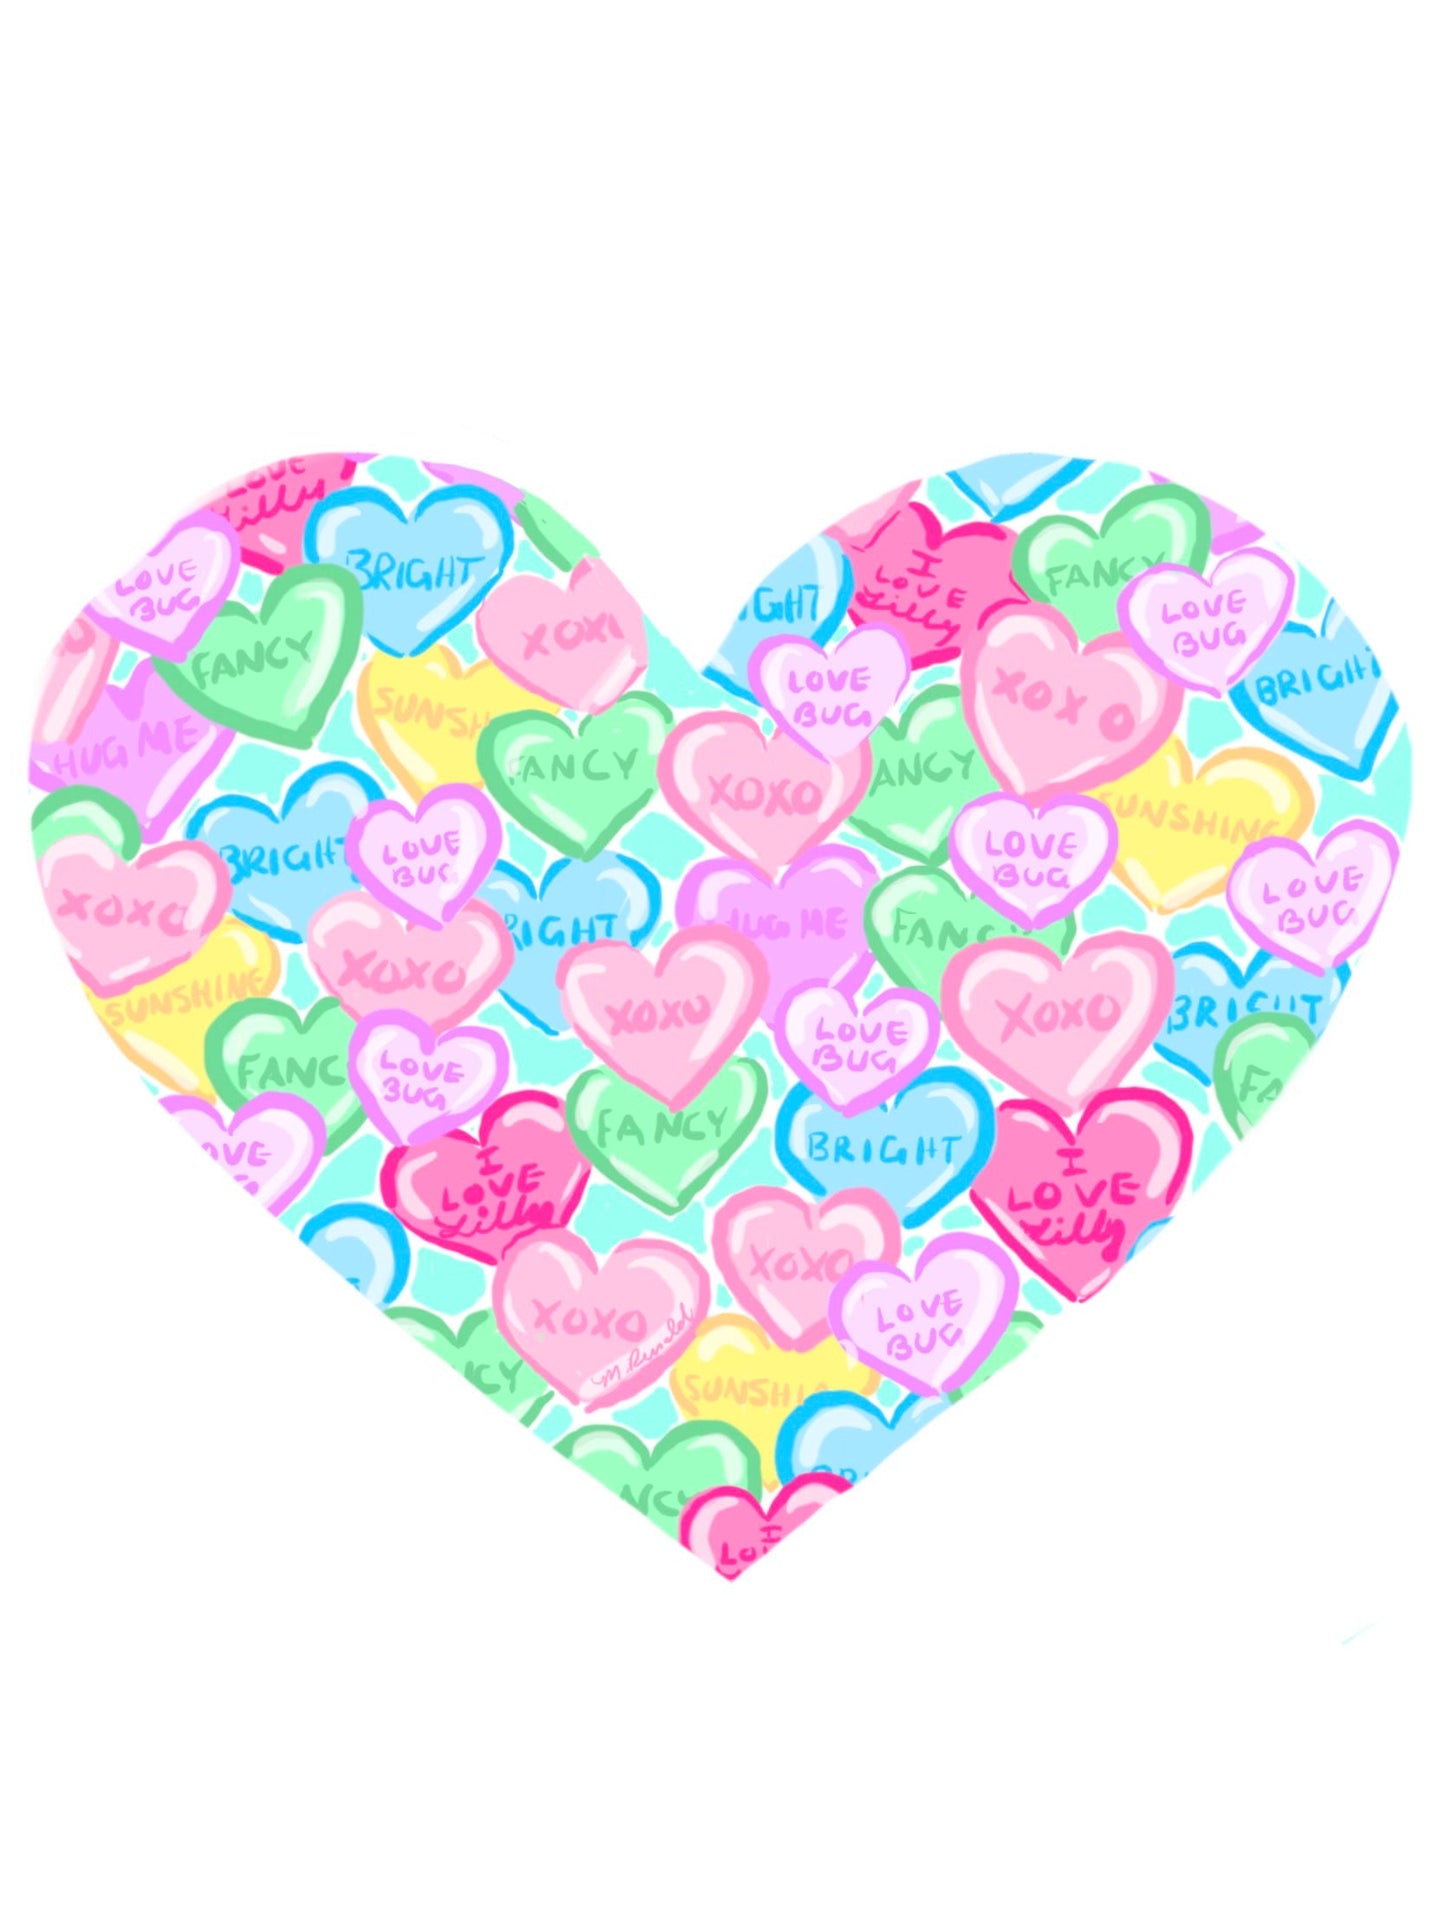 Heart Shaped Candied Hearts T-shirts Design